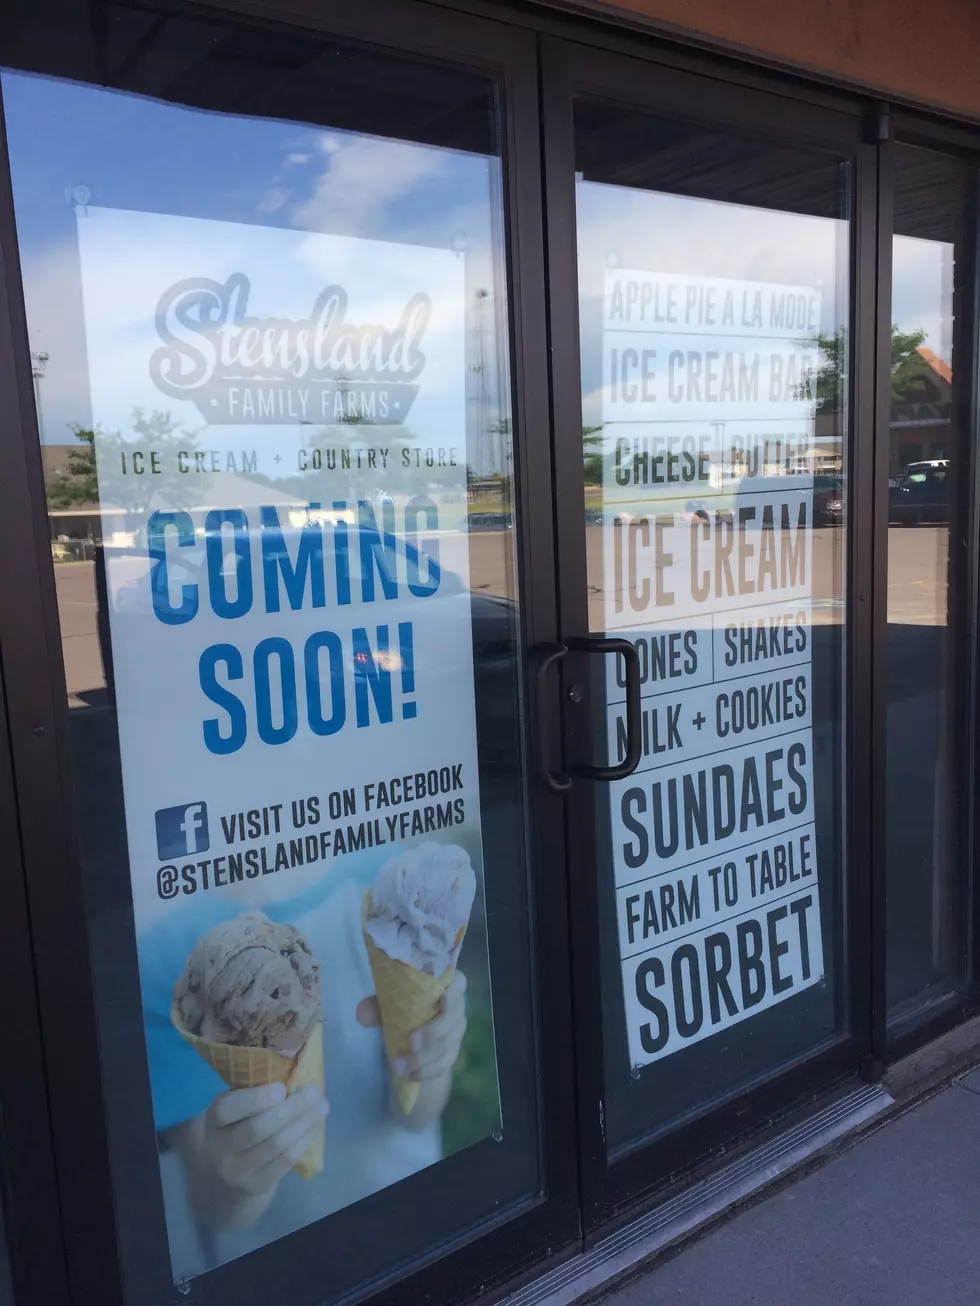 New Ice Creamery Coming to Sioux Falls